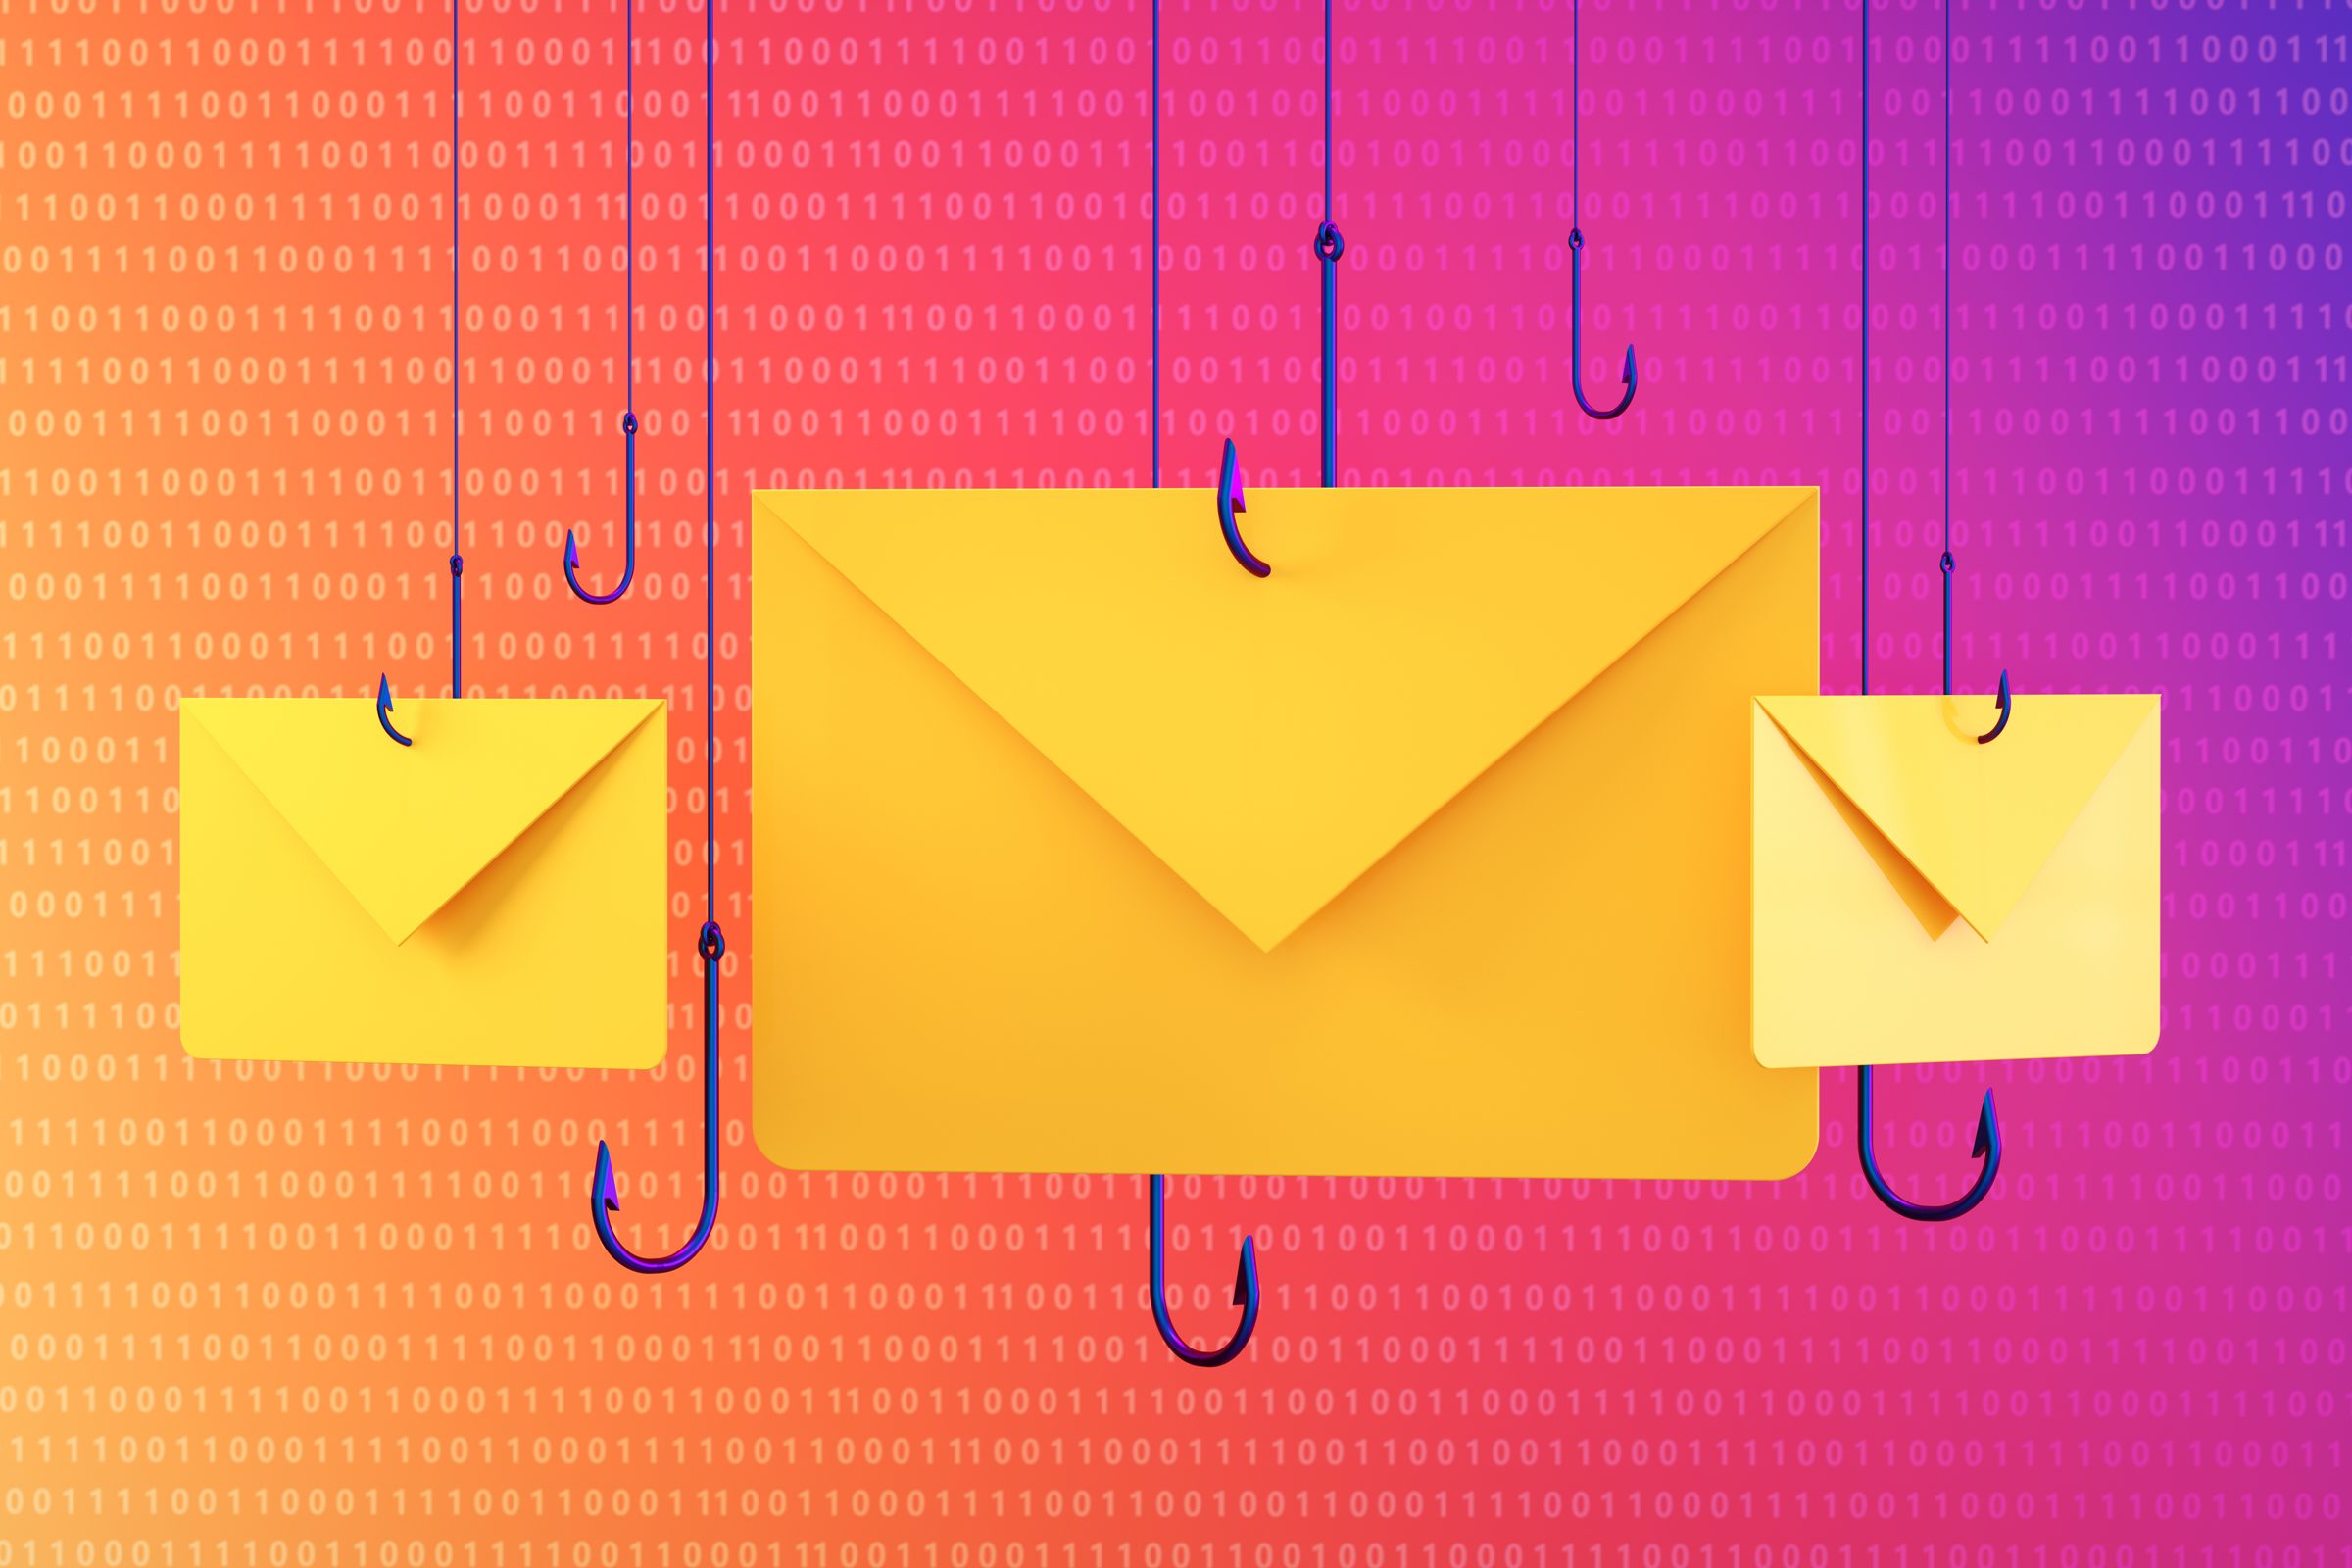 phishing emails on a gradient background